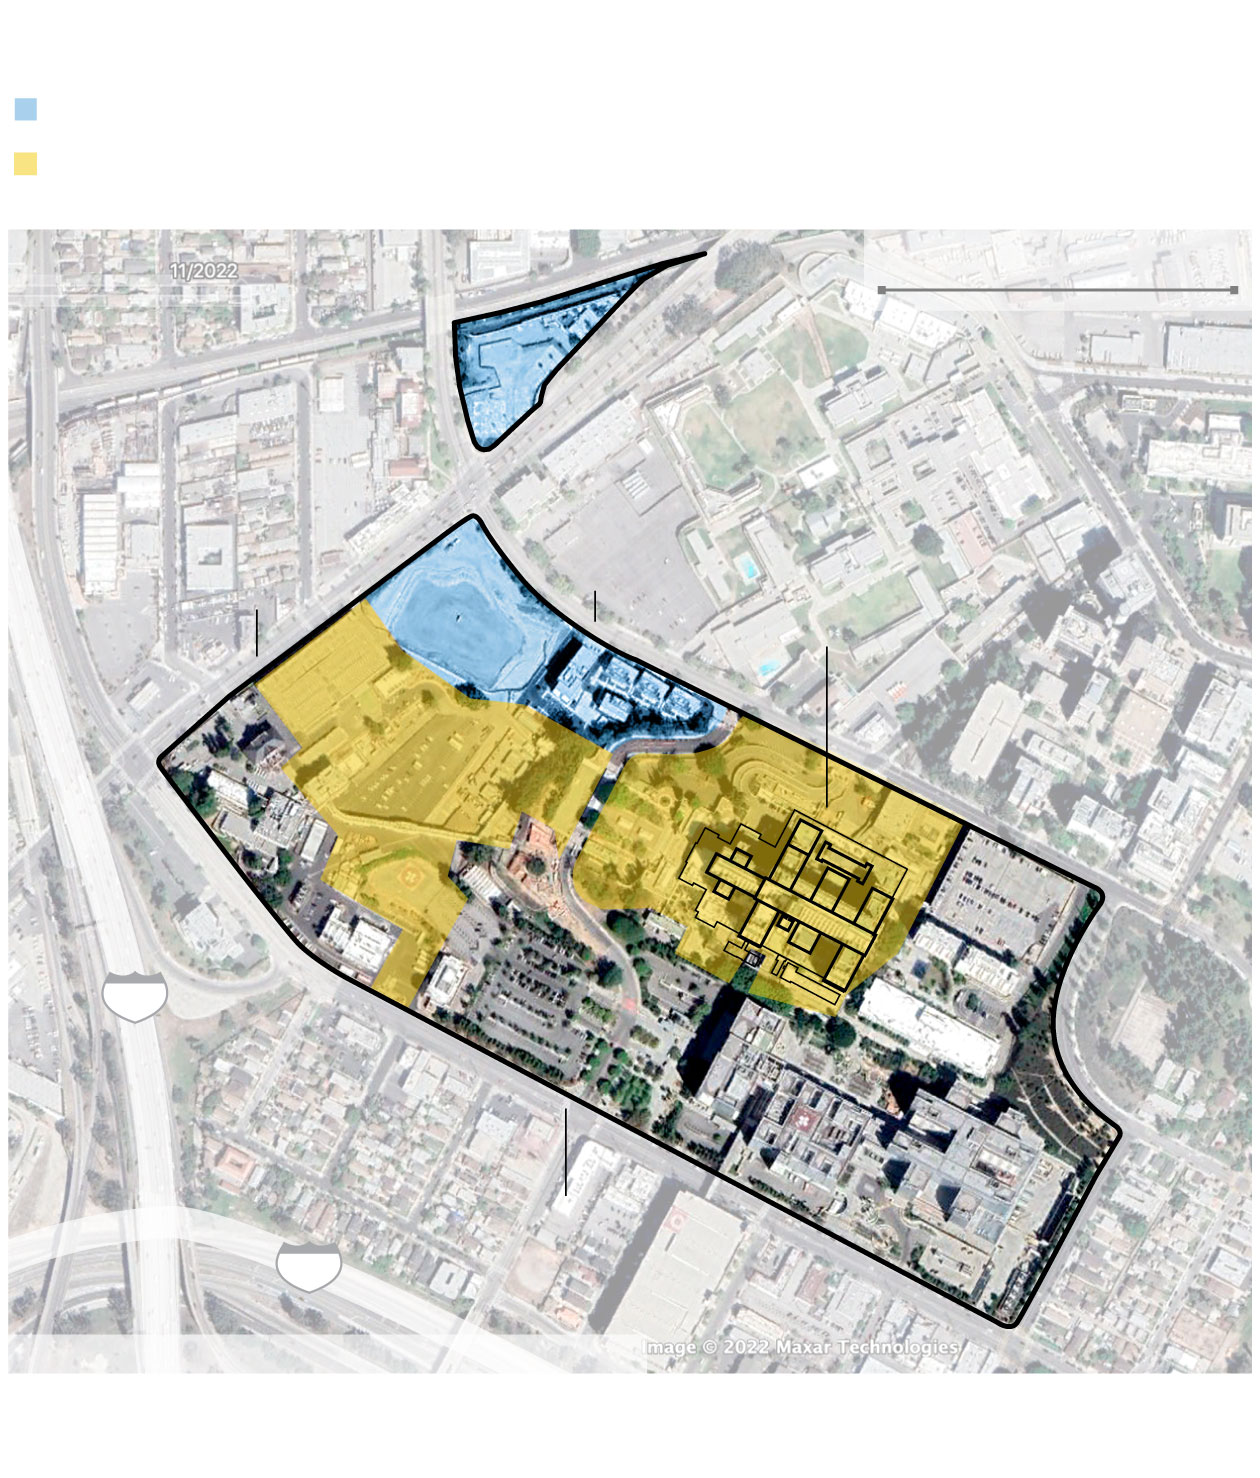 Map shows the Greater General Hospital campus development area near Lincoln Heights.